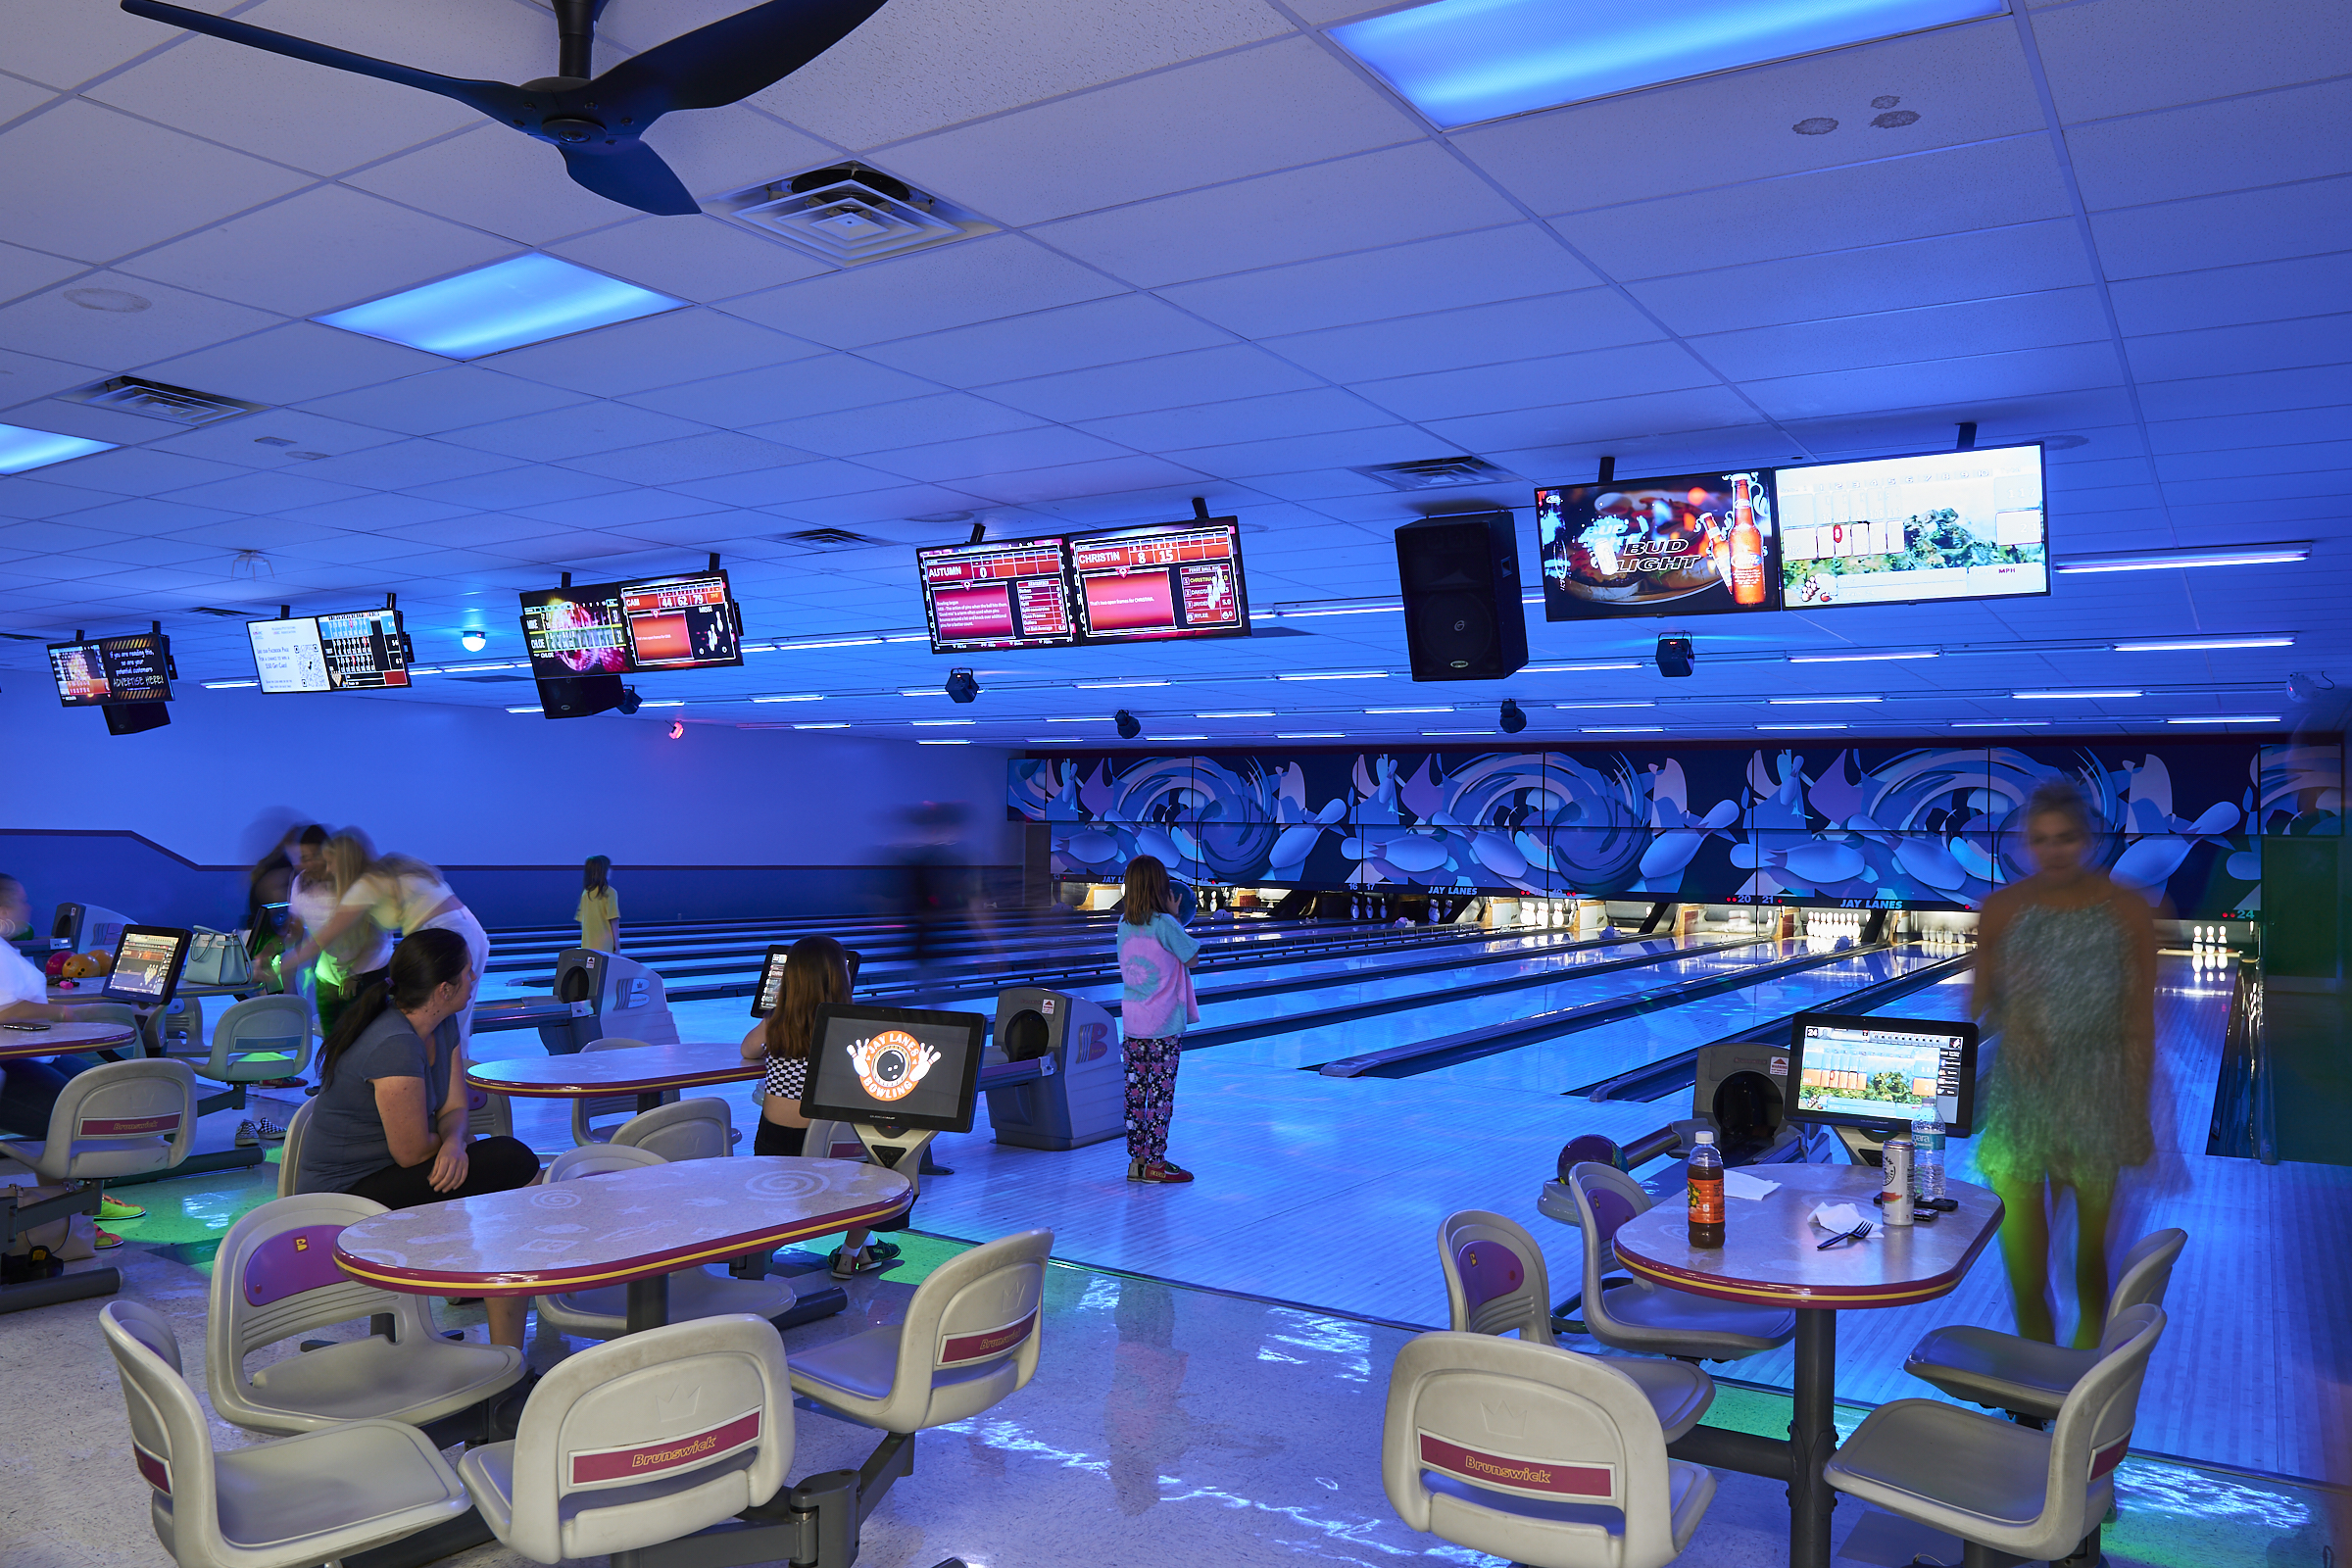 Bowl Your Way Through the Heat: Why Bowling Could Be Your New Favorite Summer Activity